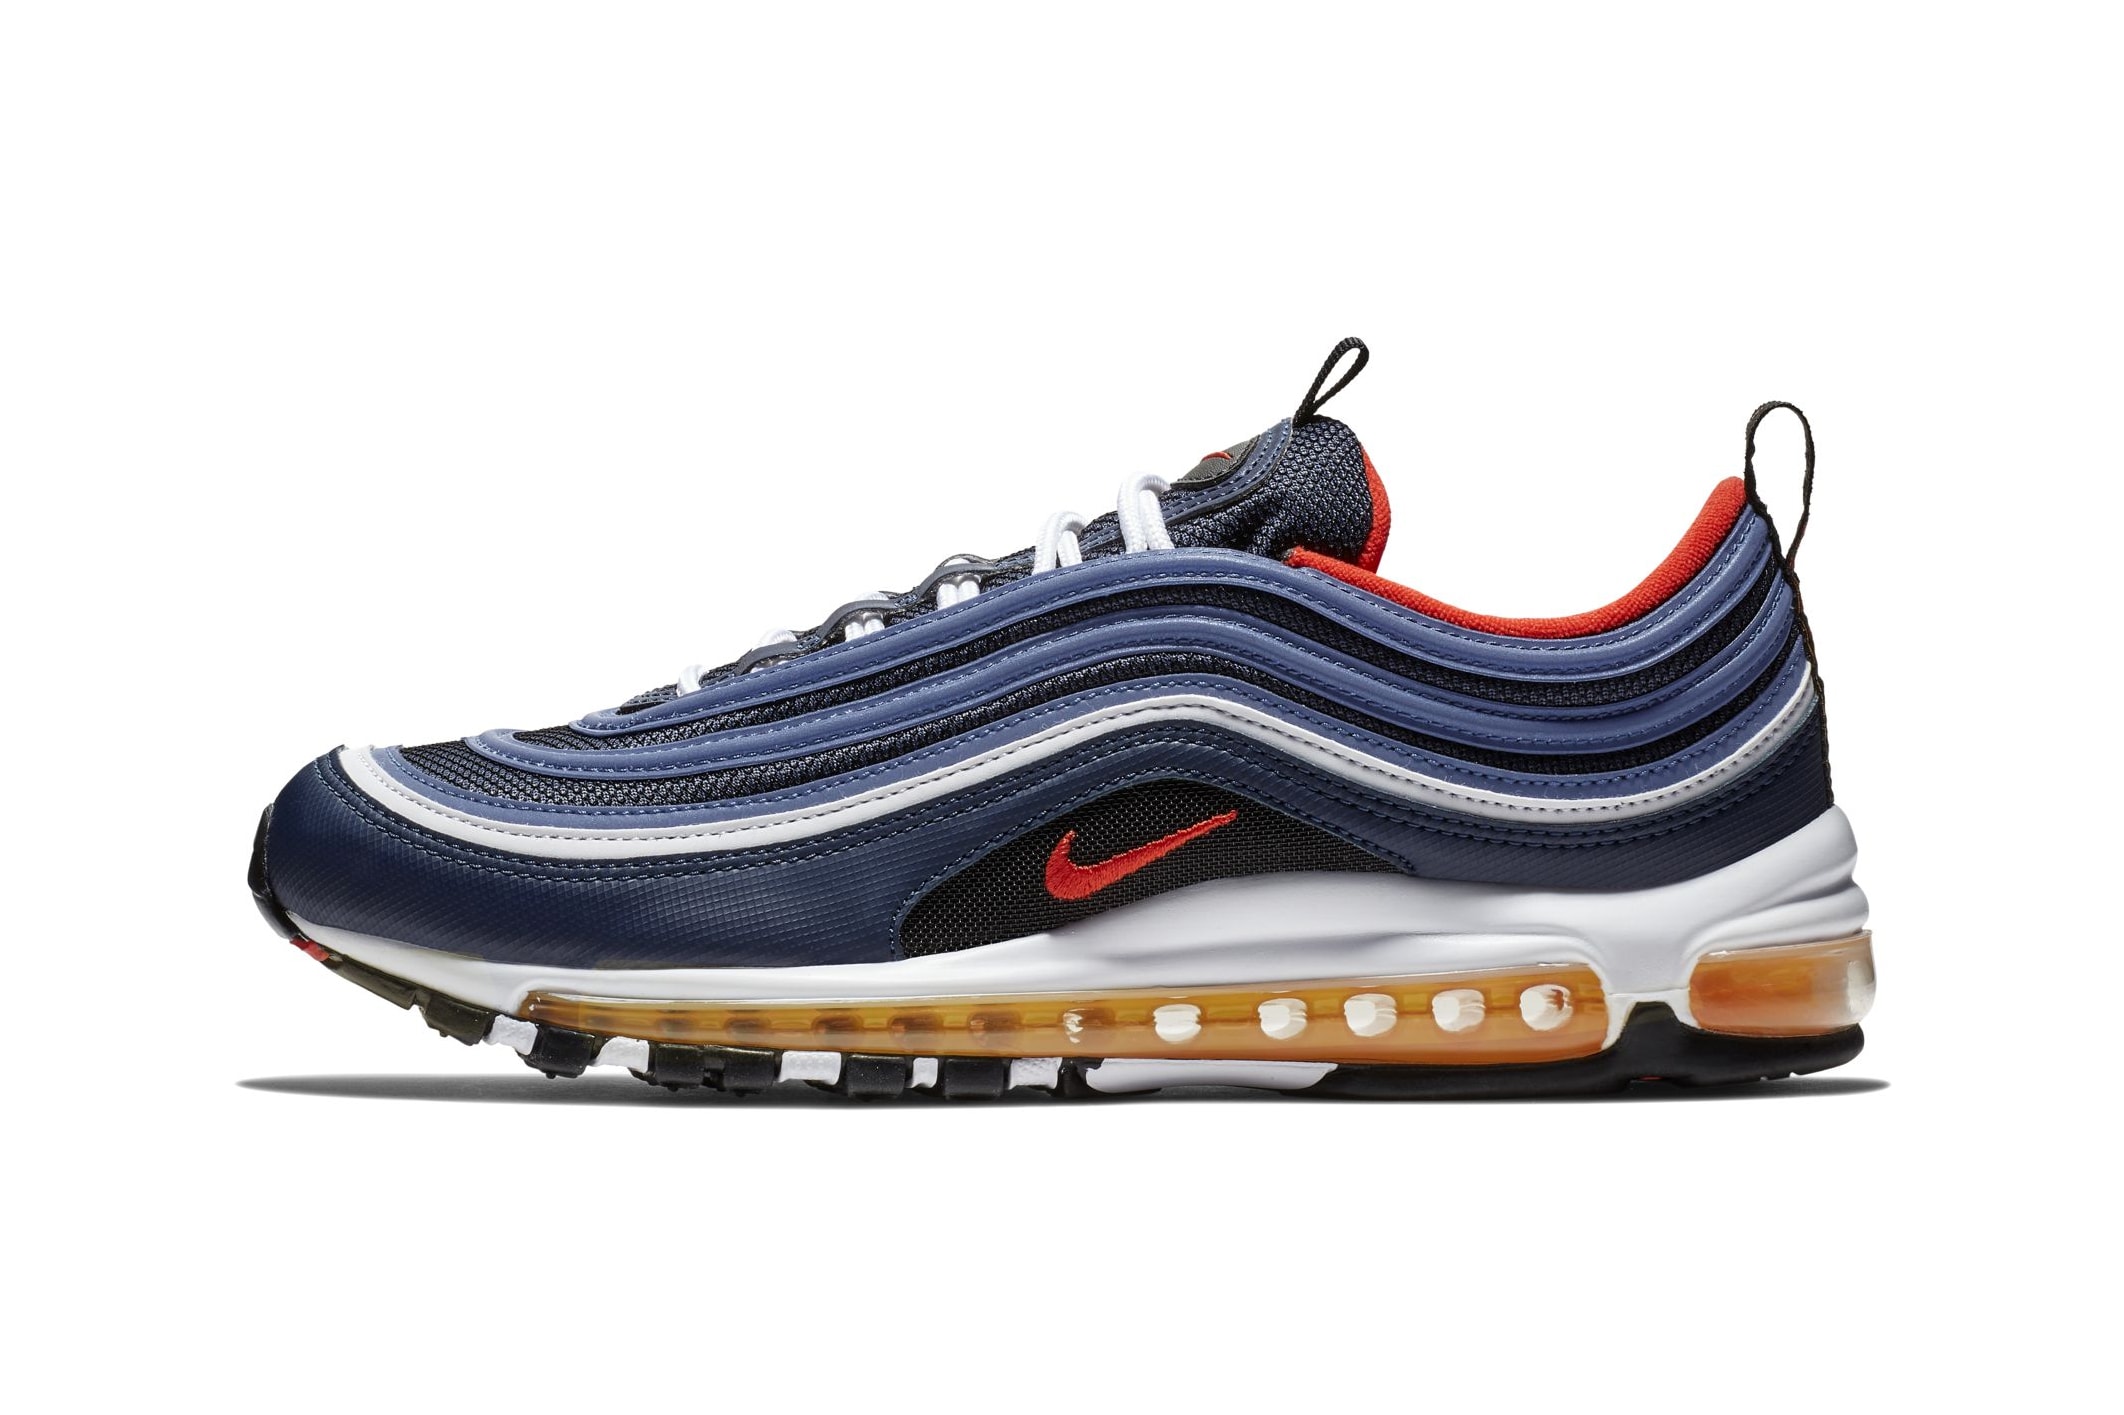 Nike Air Max 97 Midnight Navy Habanero Red Release info sneaker colorway date price navy red yellow